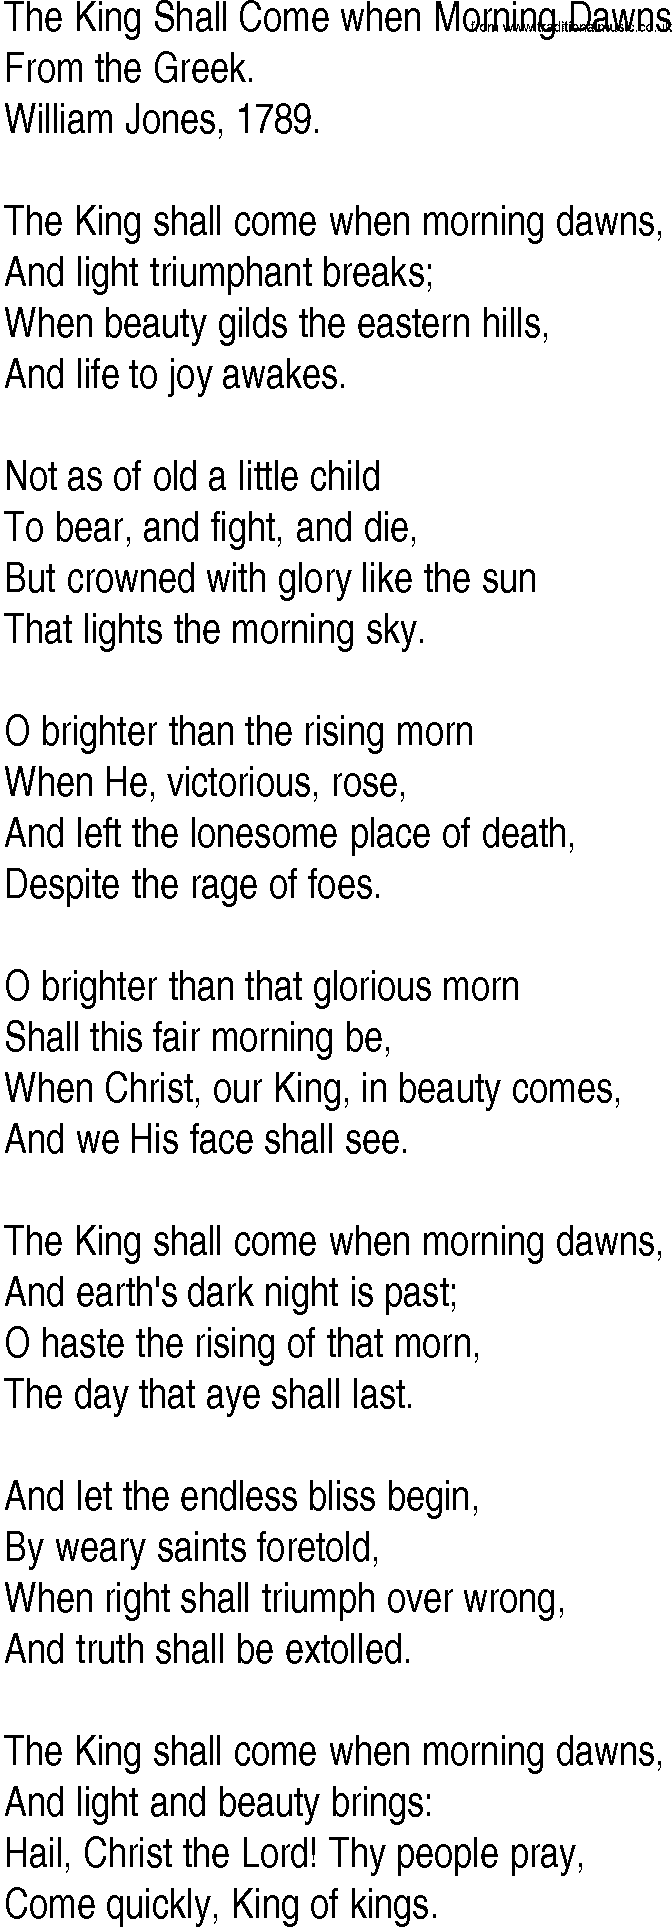 Hymn and Gospel Song: The King Shall Come when Morning Dawns by From the Greek lyrics